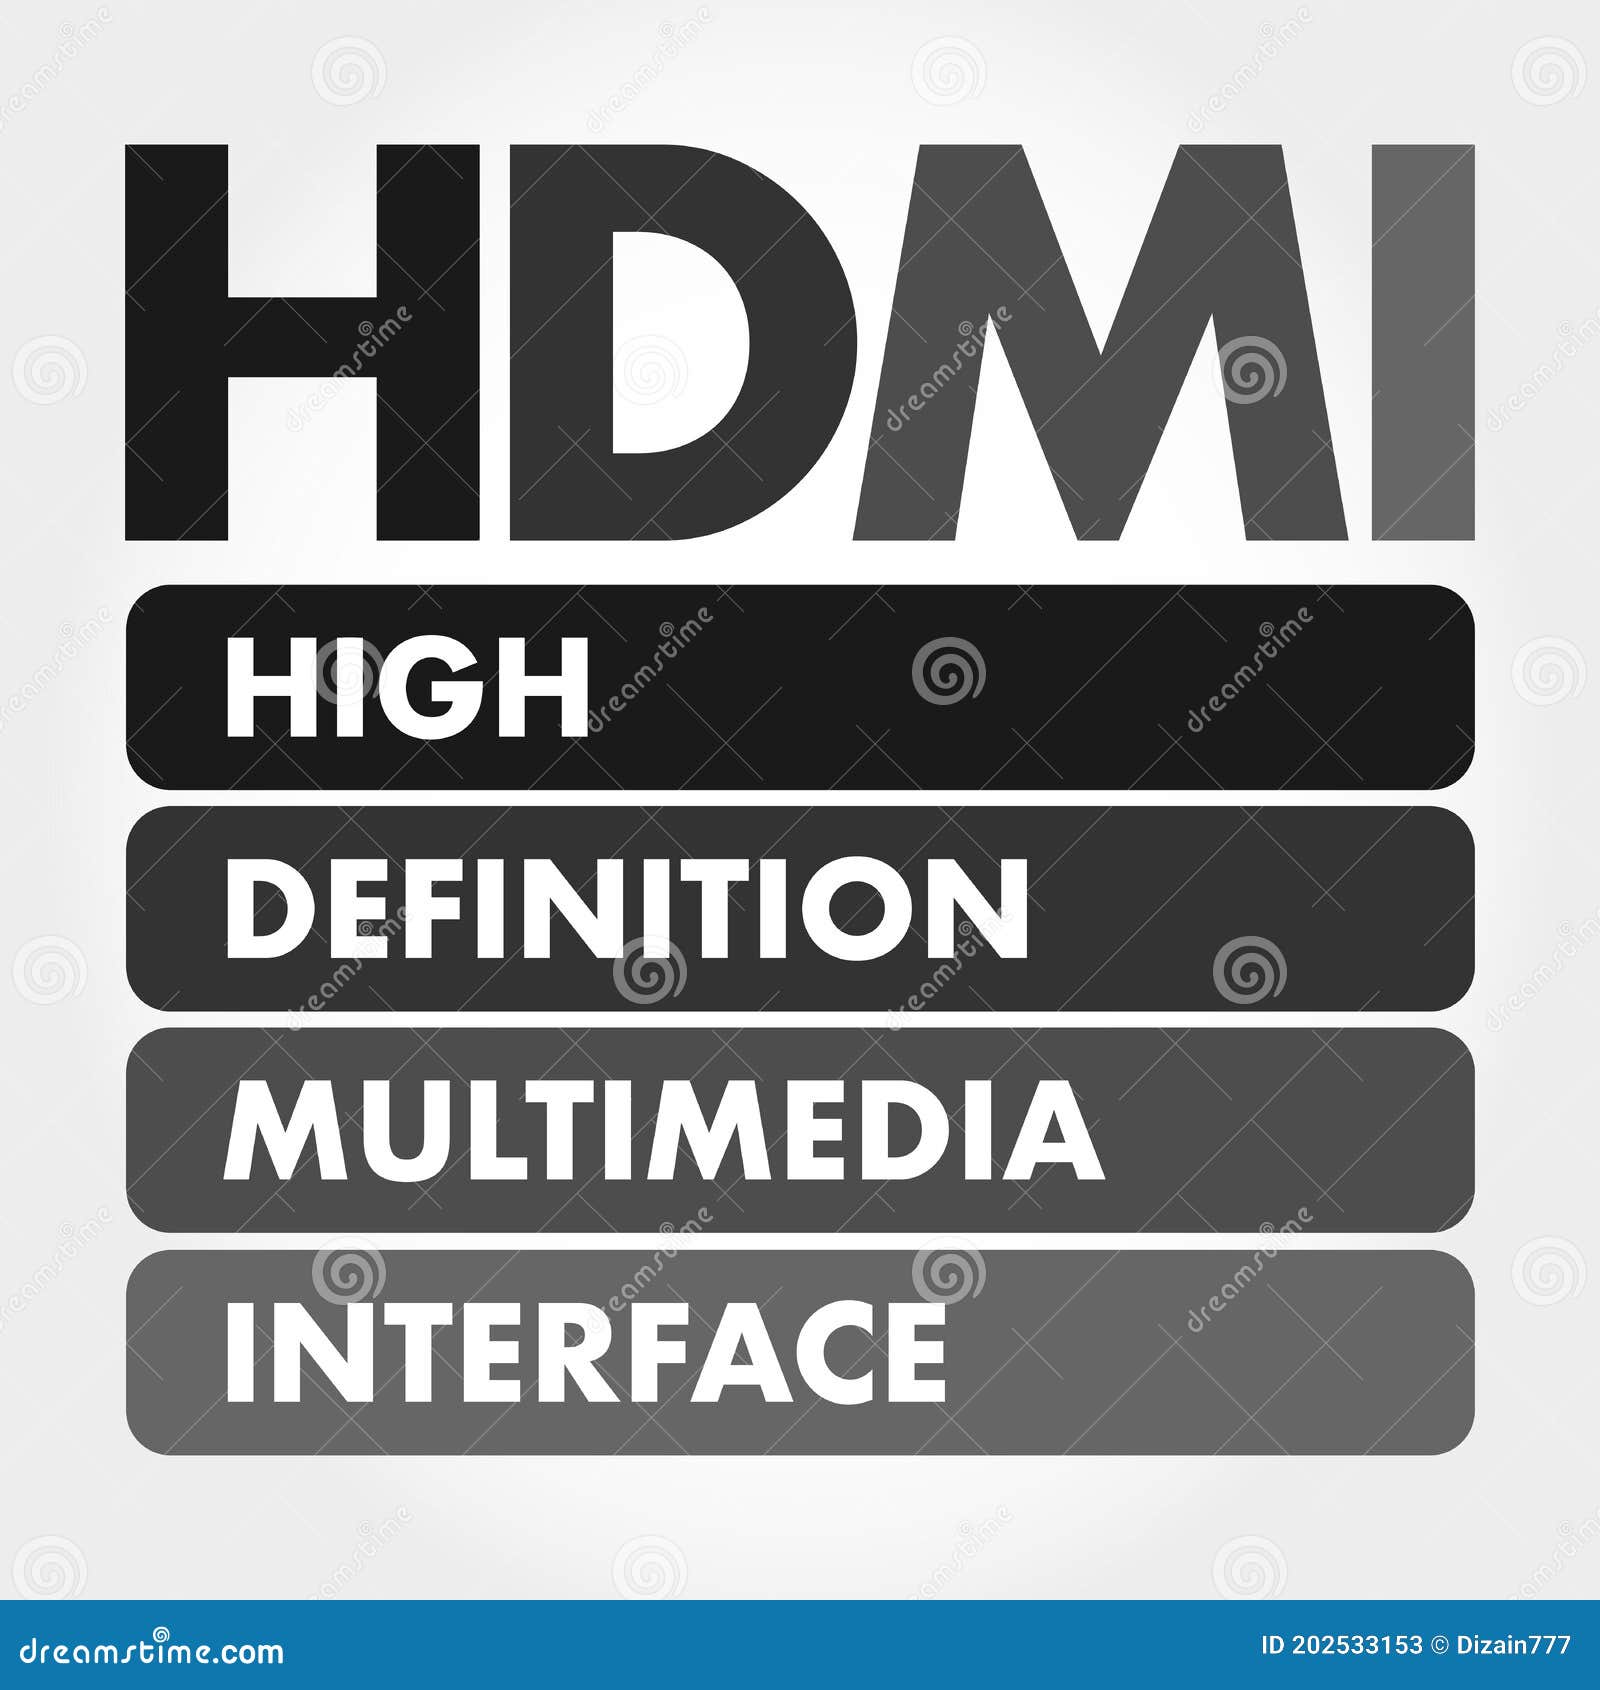 HDMI Acronym, Technology Concept Background Stock Illustration - of connection, interconnect: